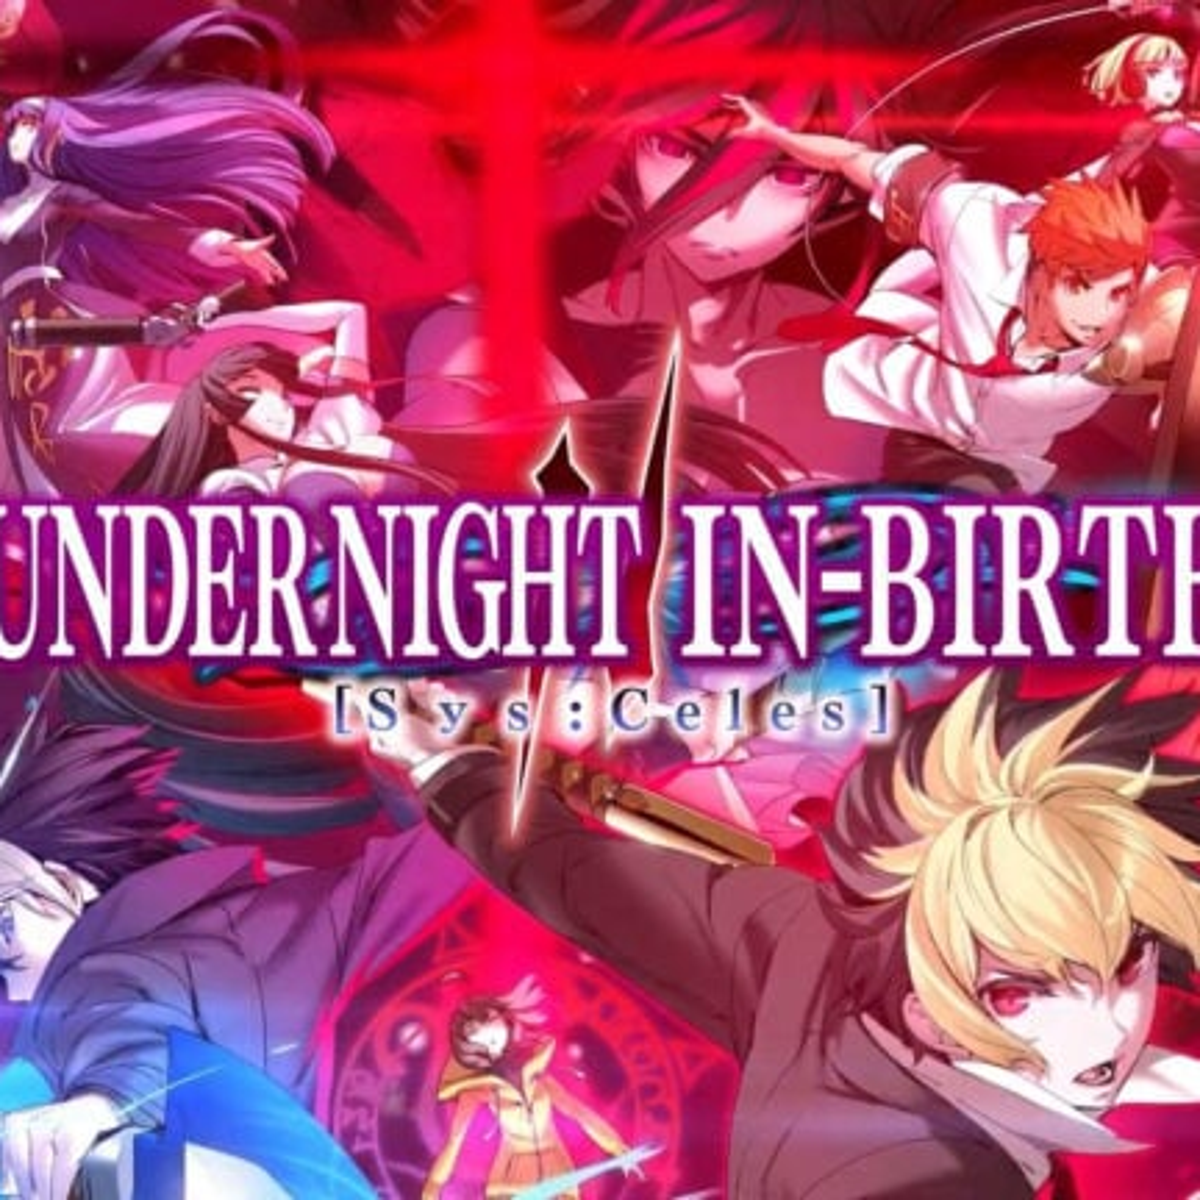 https://assetsio.reedpopcdn.com/Under-Night-In-Birth-2-Announced_08-04-23-768x432.jpg?width=1200&height=1200&fit=crop&quality=100&format=png&enable=upscale&auto=webp